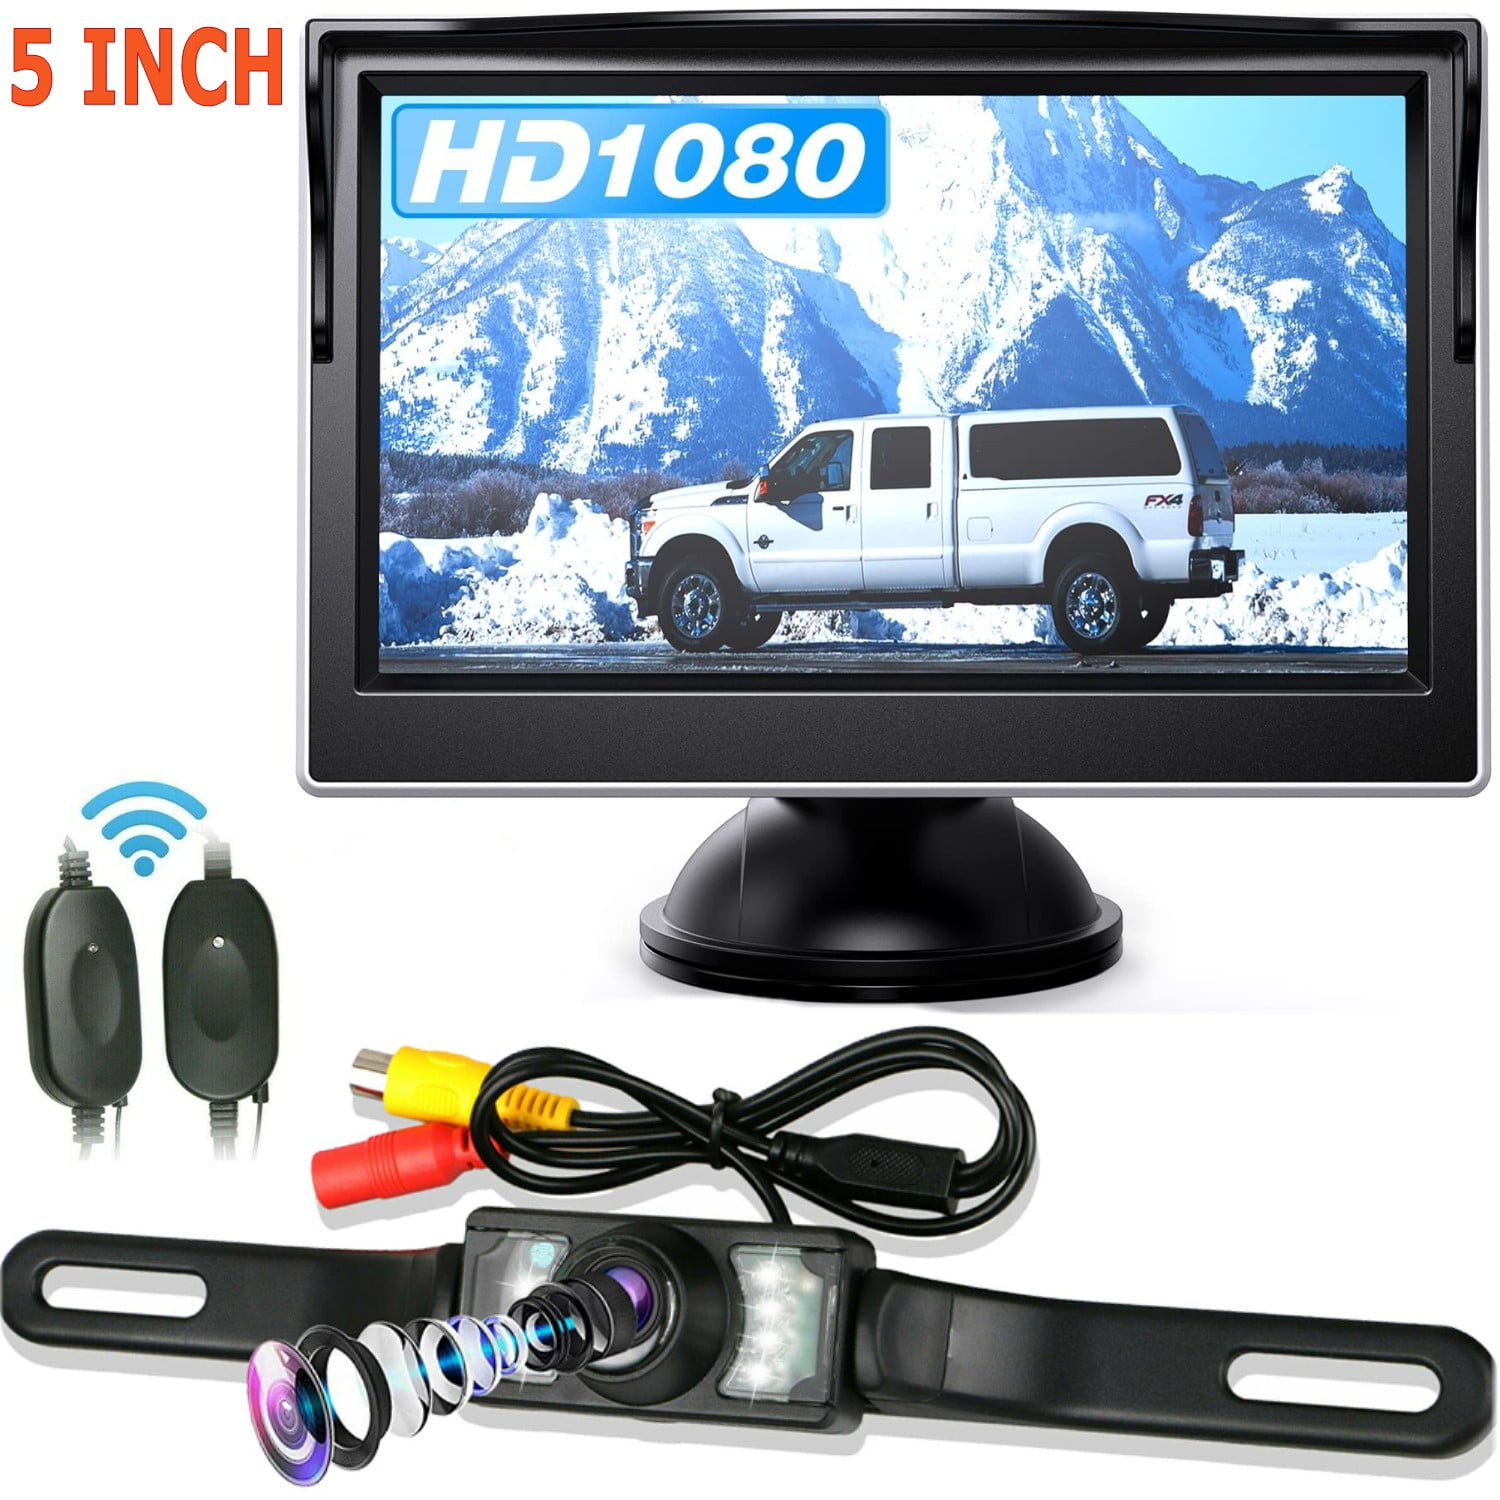 Wireless Backup Camera System Kit with 5'' Monitor Rear View Reverse System  for Car/Truck/Van/Pickup/Camper